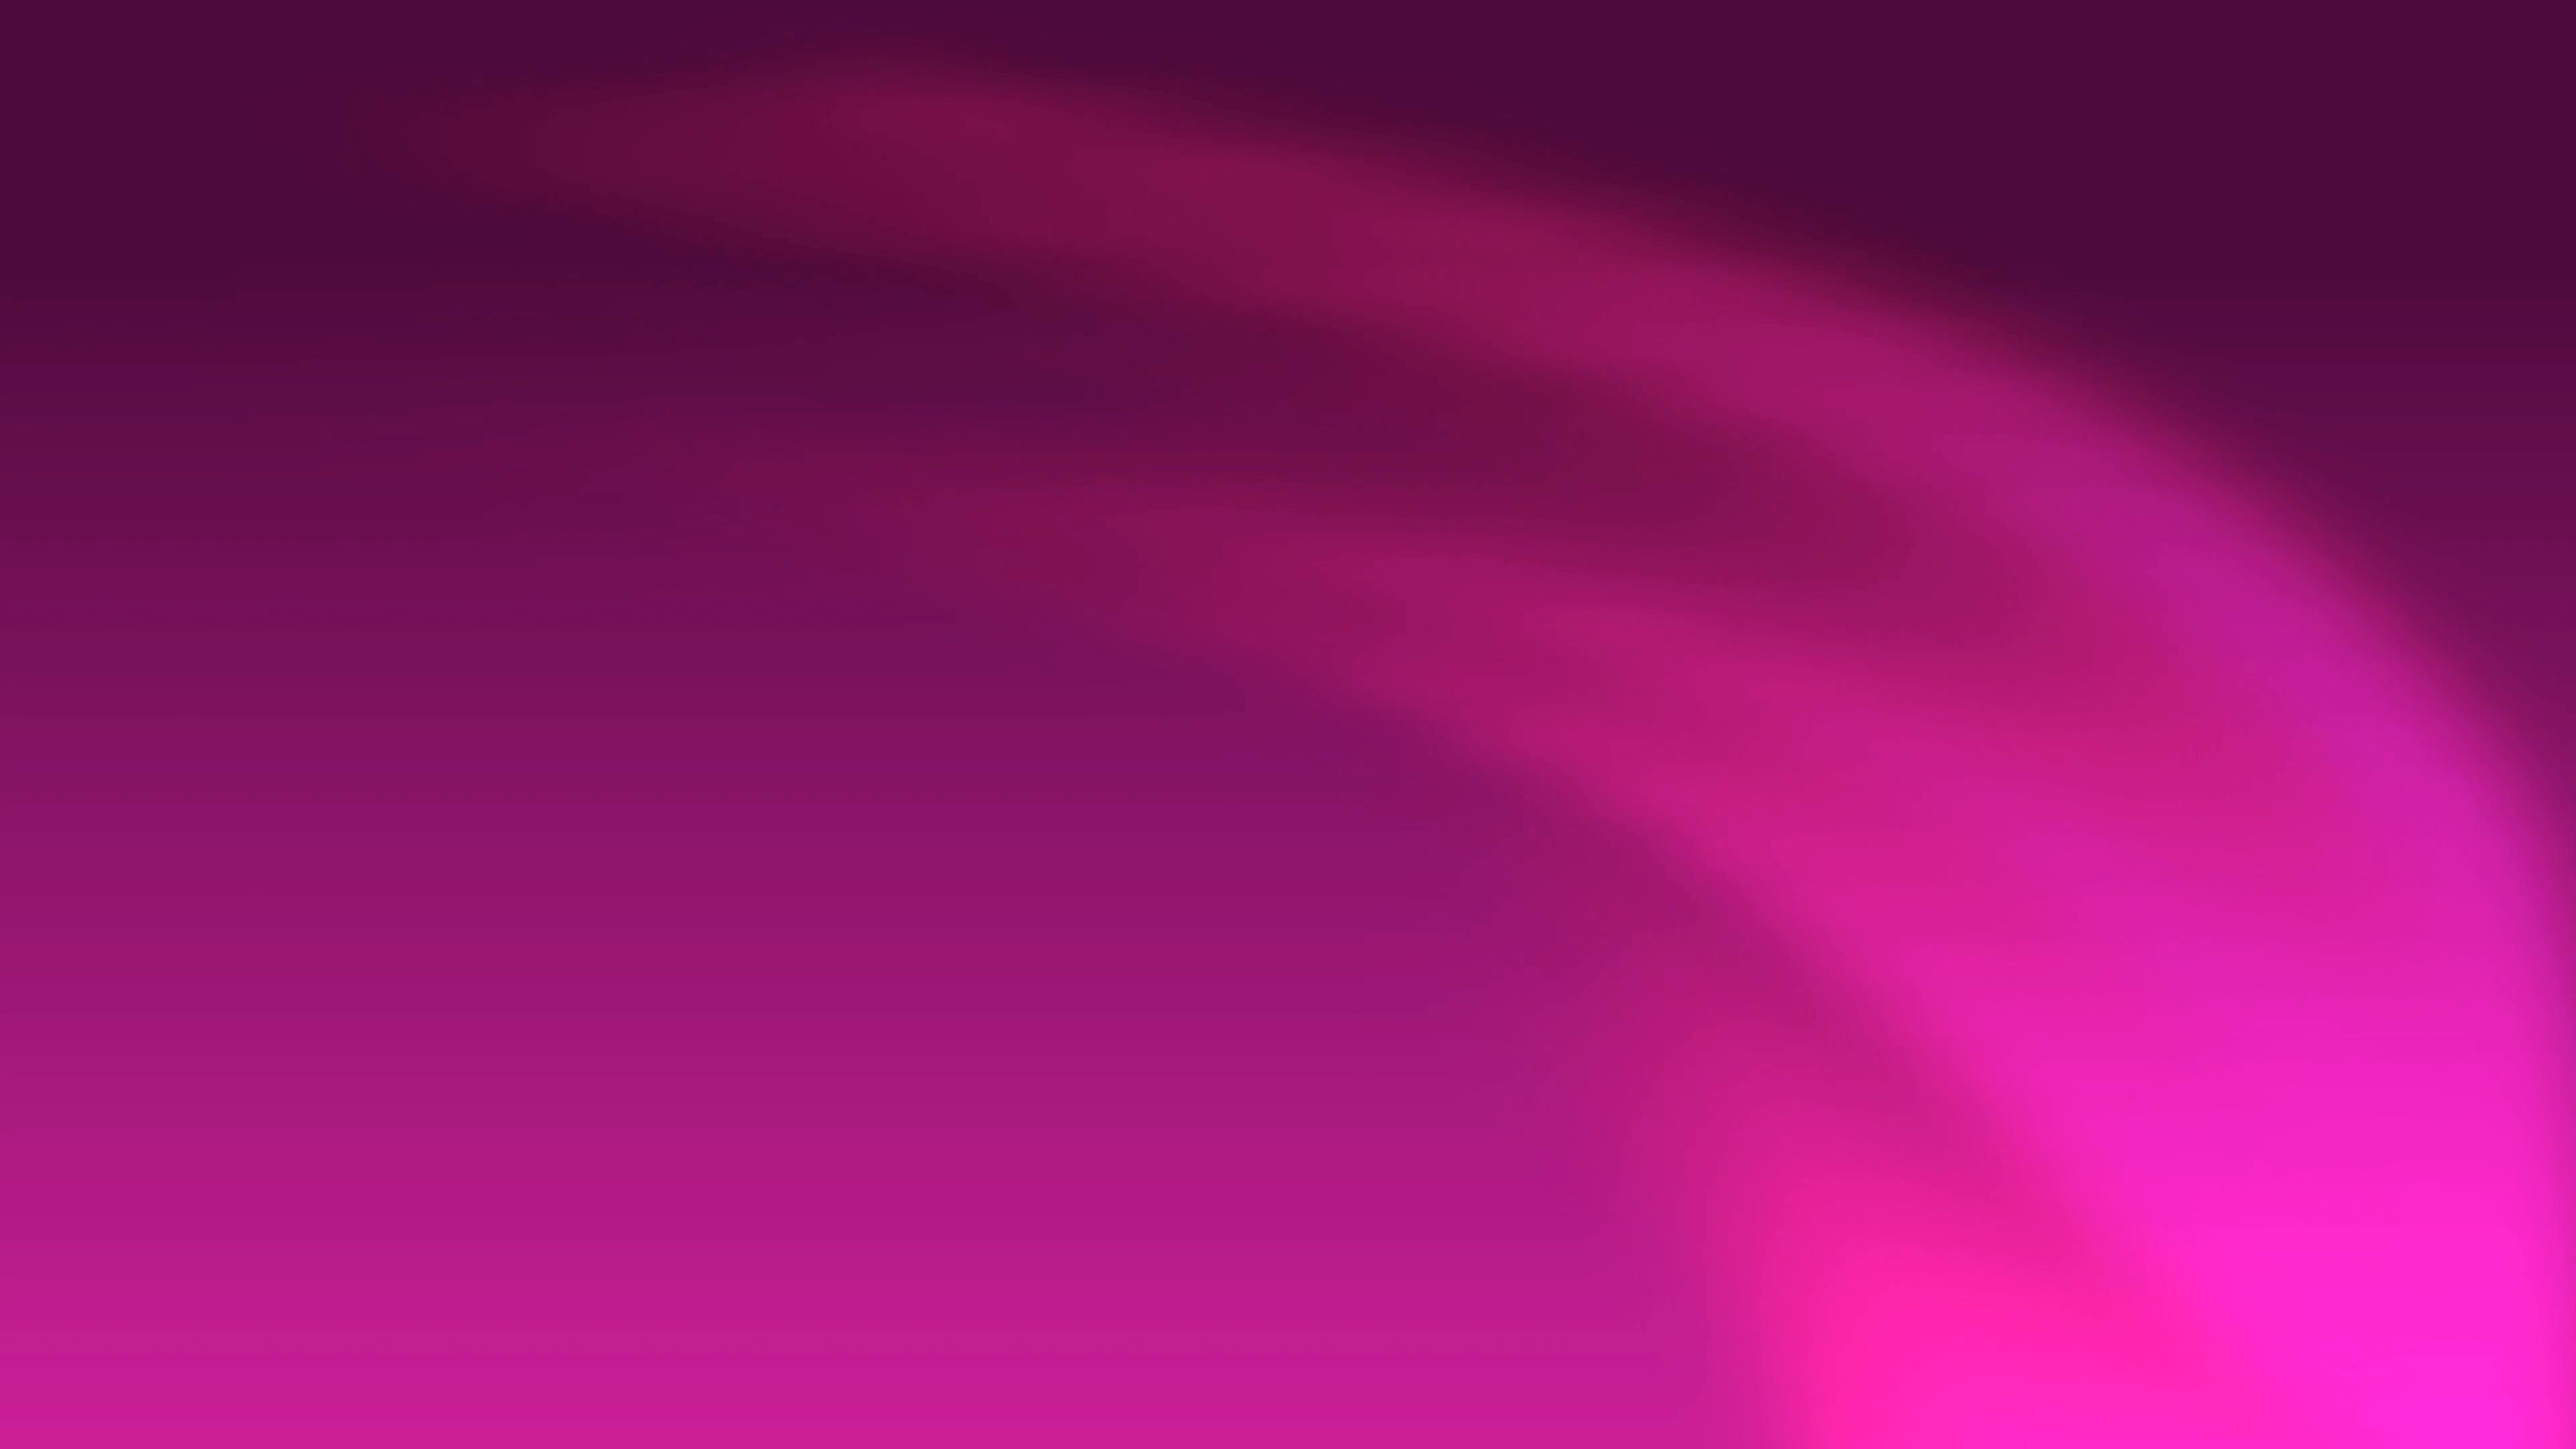 3840 x 2160 · png - Soft Pink Backgrounds - Wallpaper Cave